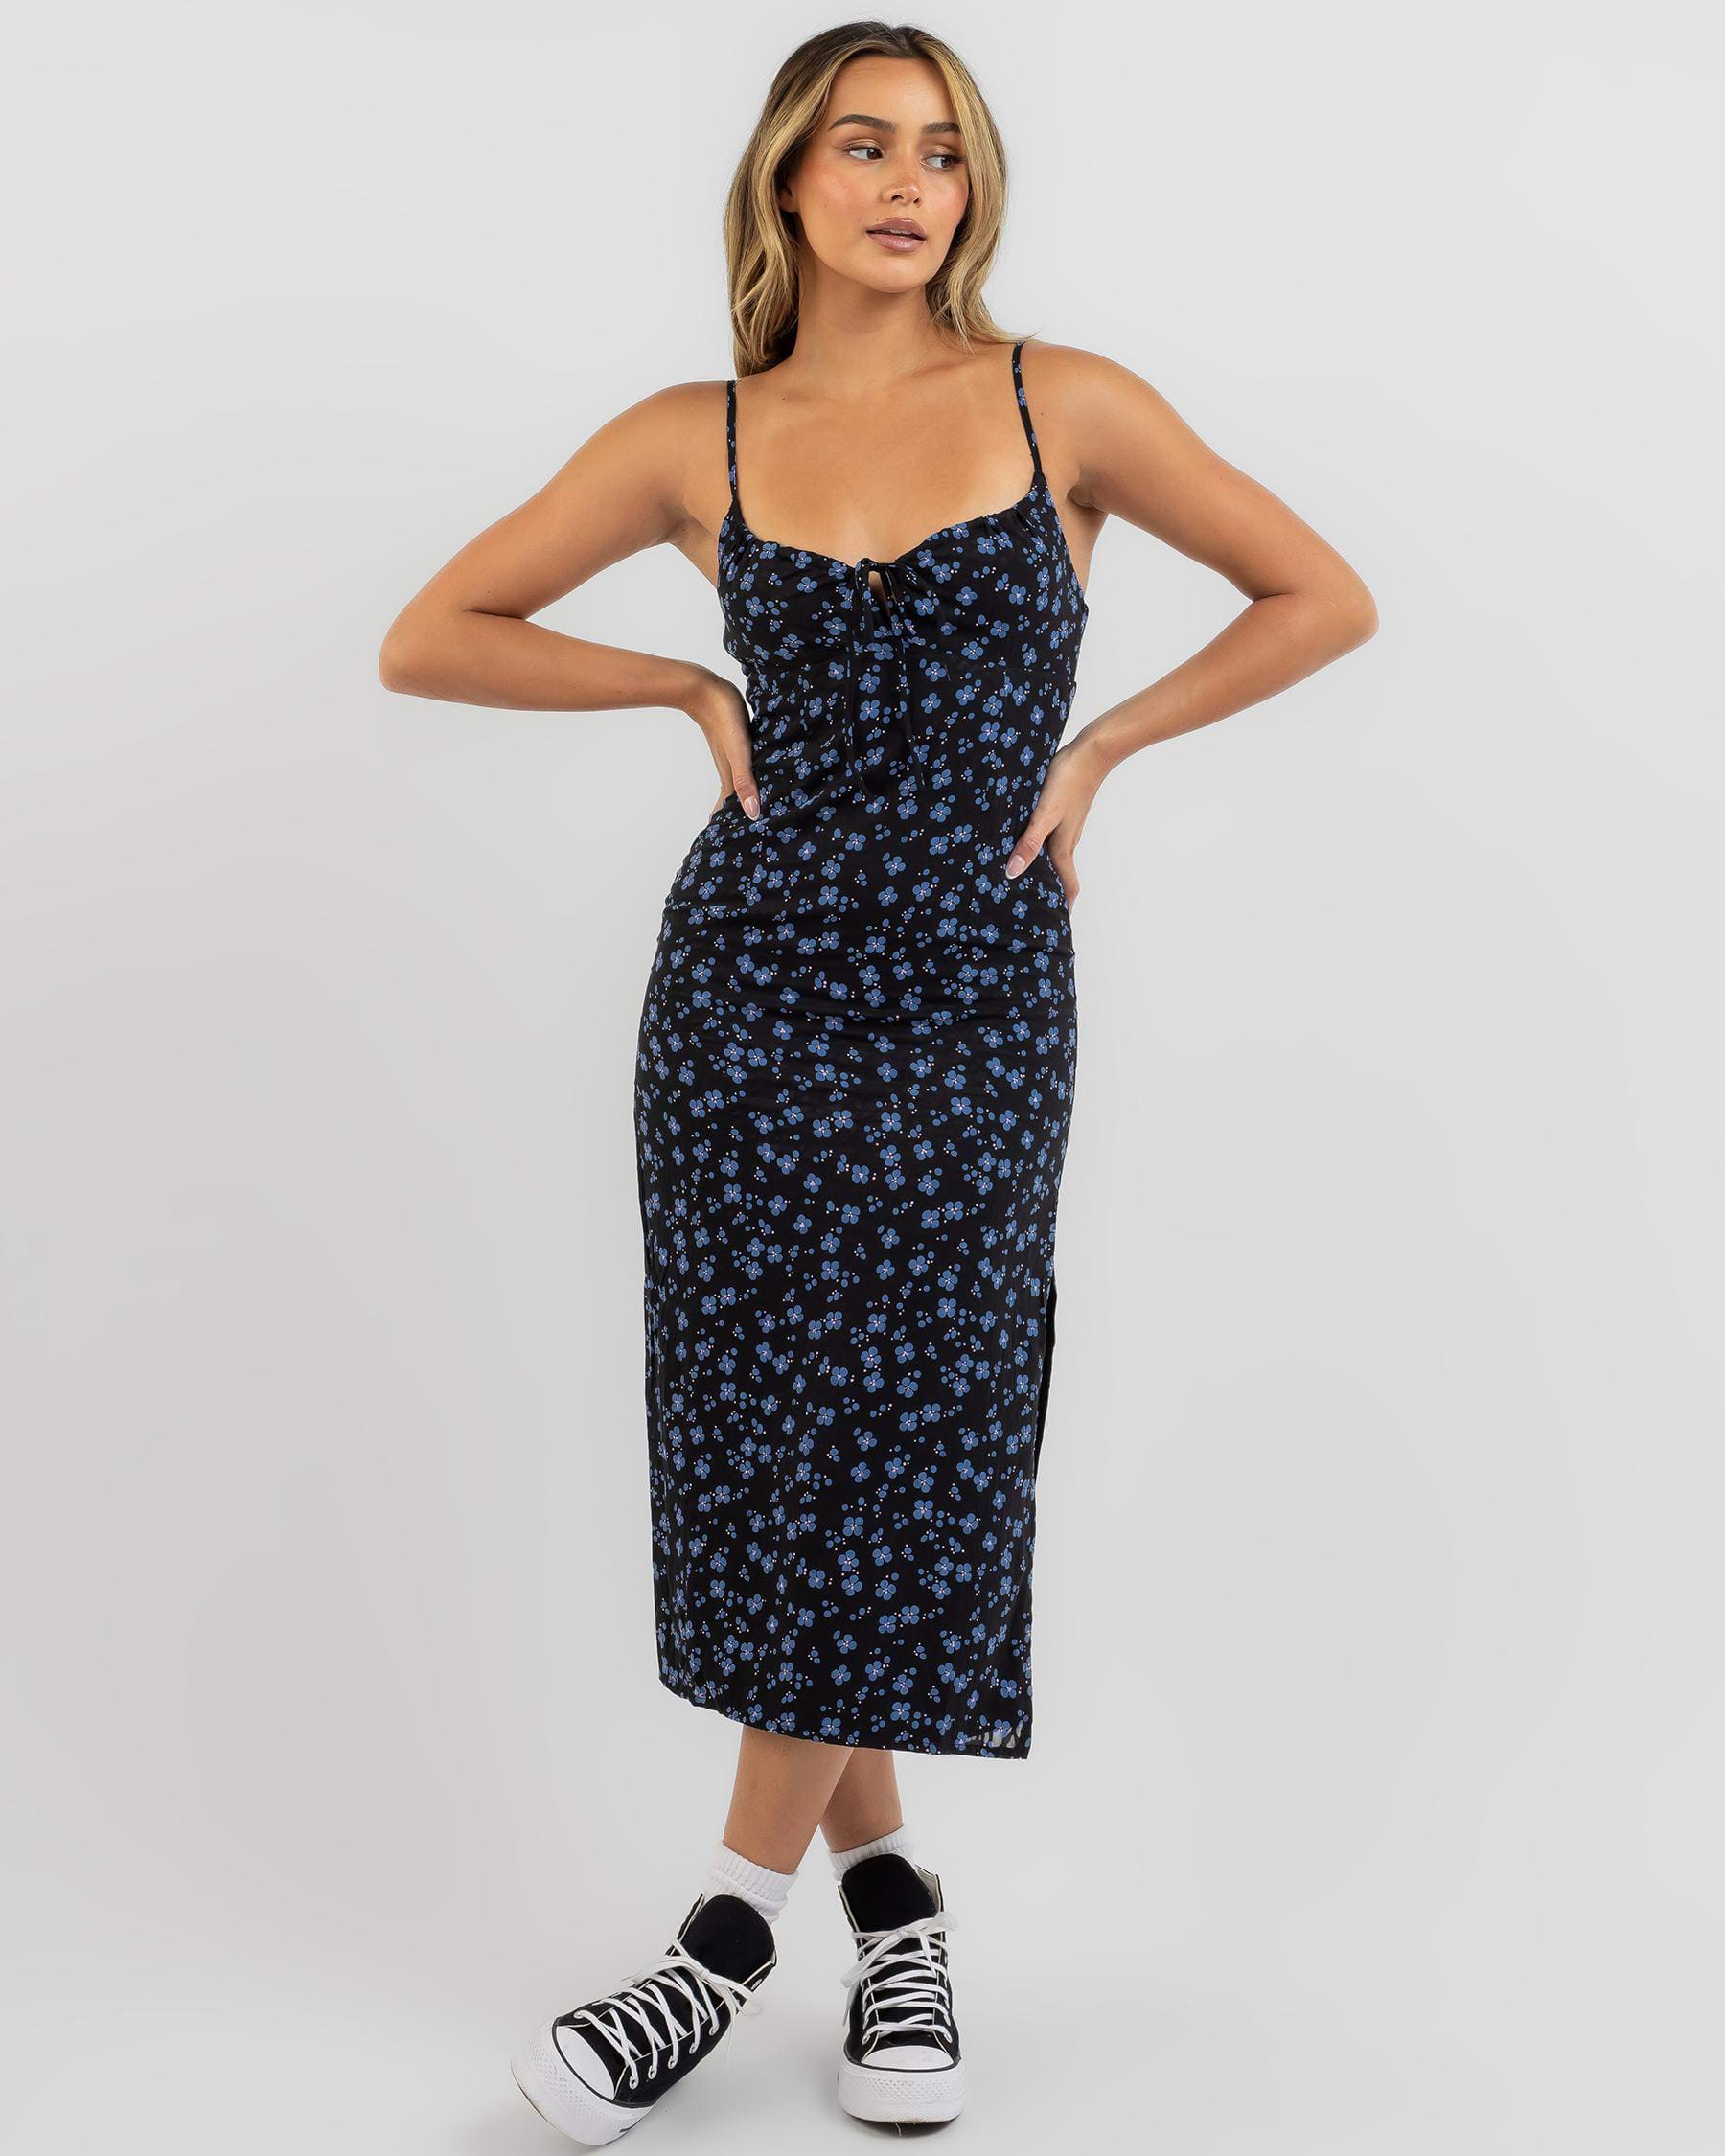 Ava And Ever Marianna Midi Dress In Black/blue - Fast Shipping & Easy ...